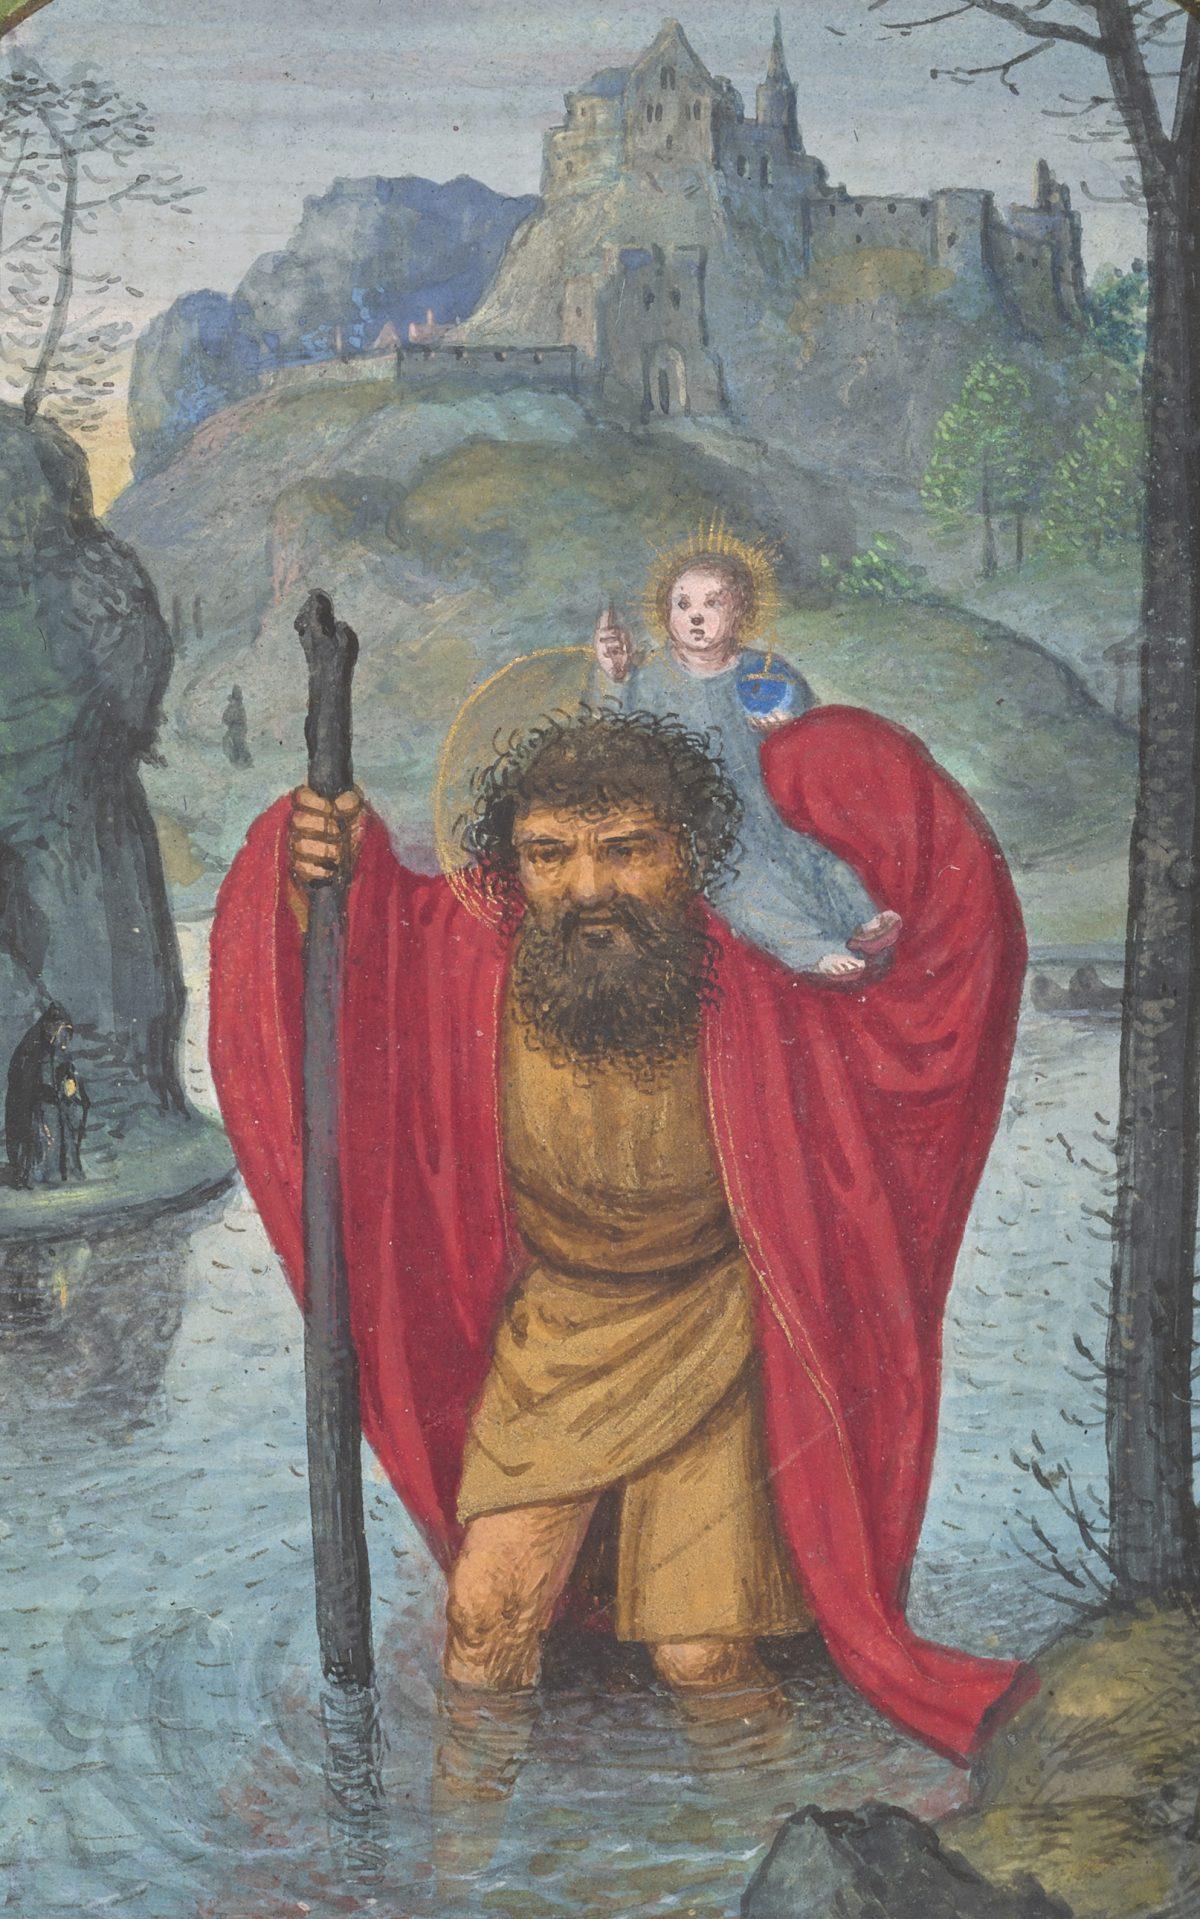 “St. Christopher Carries Christ Child," from the Book of Hours, Bruges, Belgium, circa 1520. The Morgan Library & Museum. (Graham S. Haber)